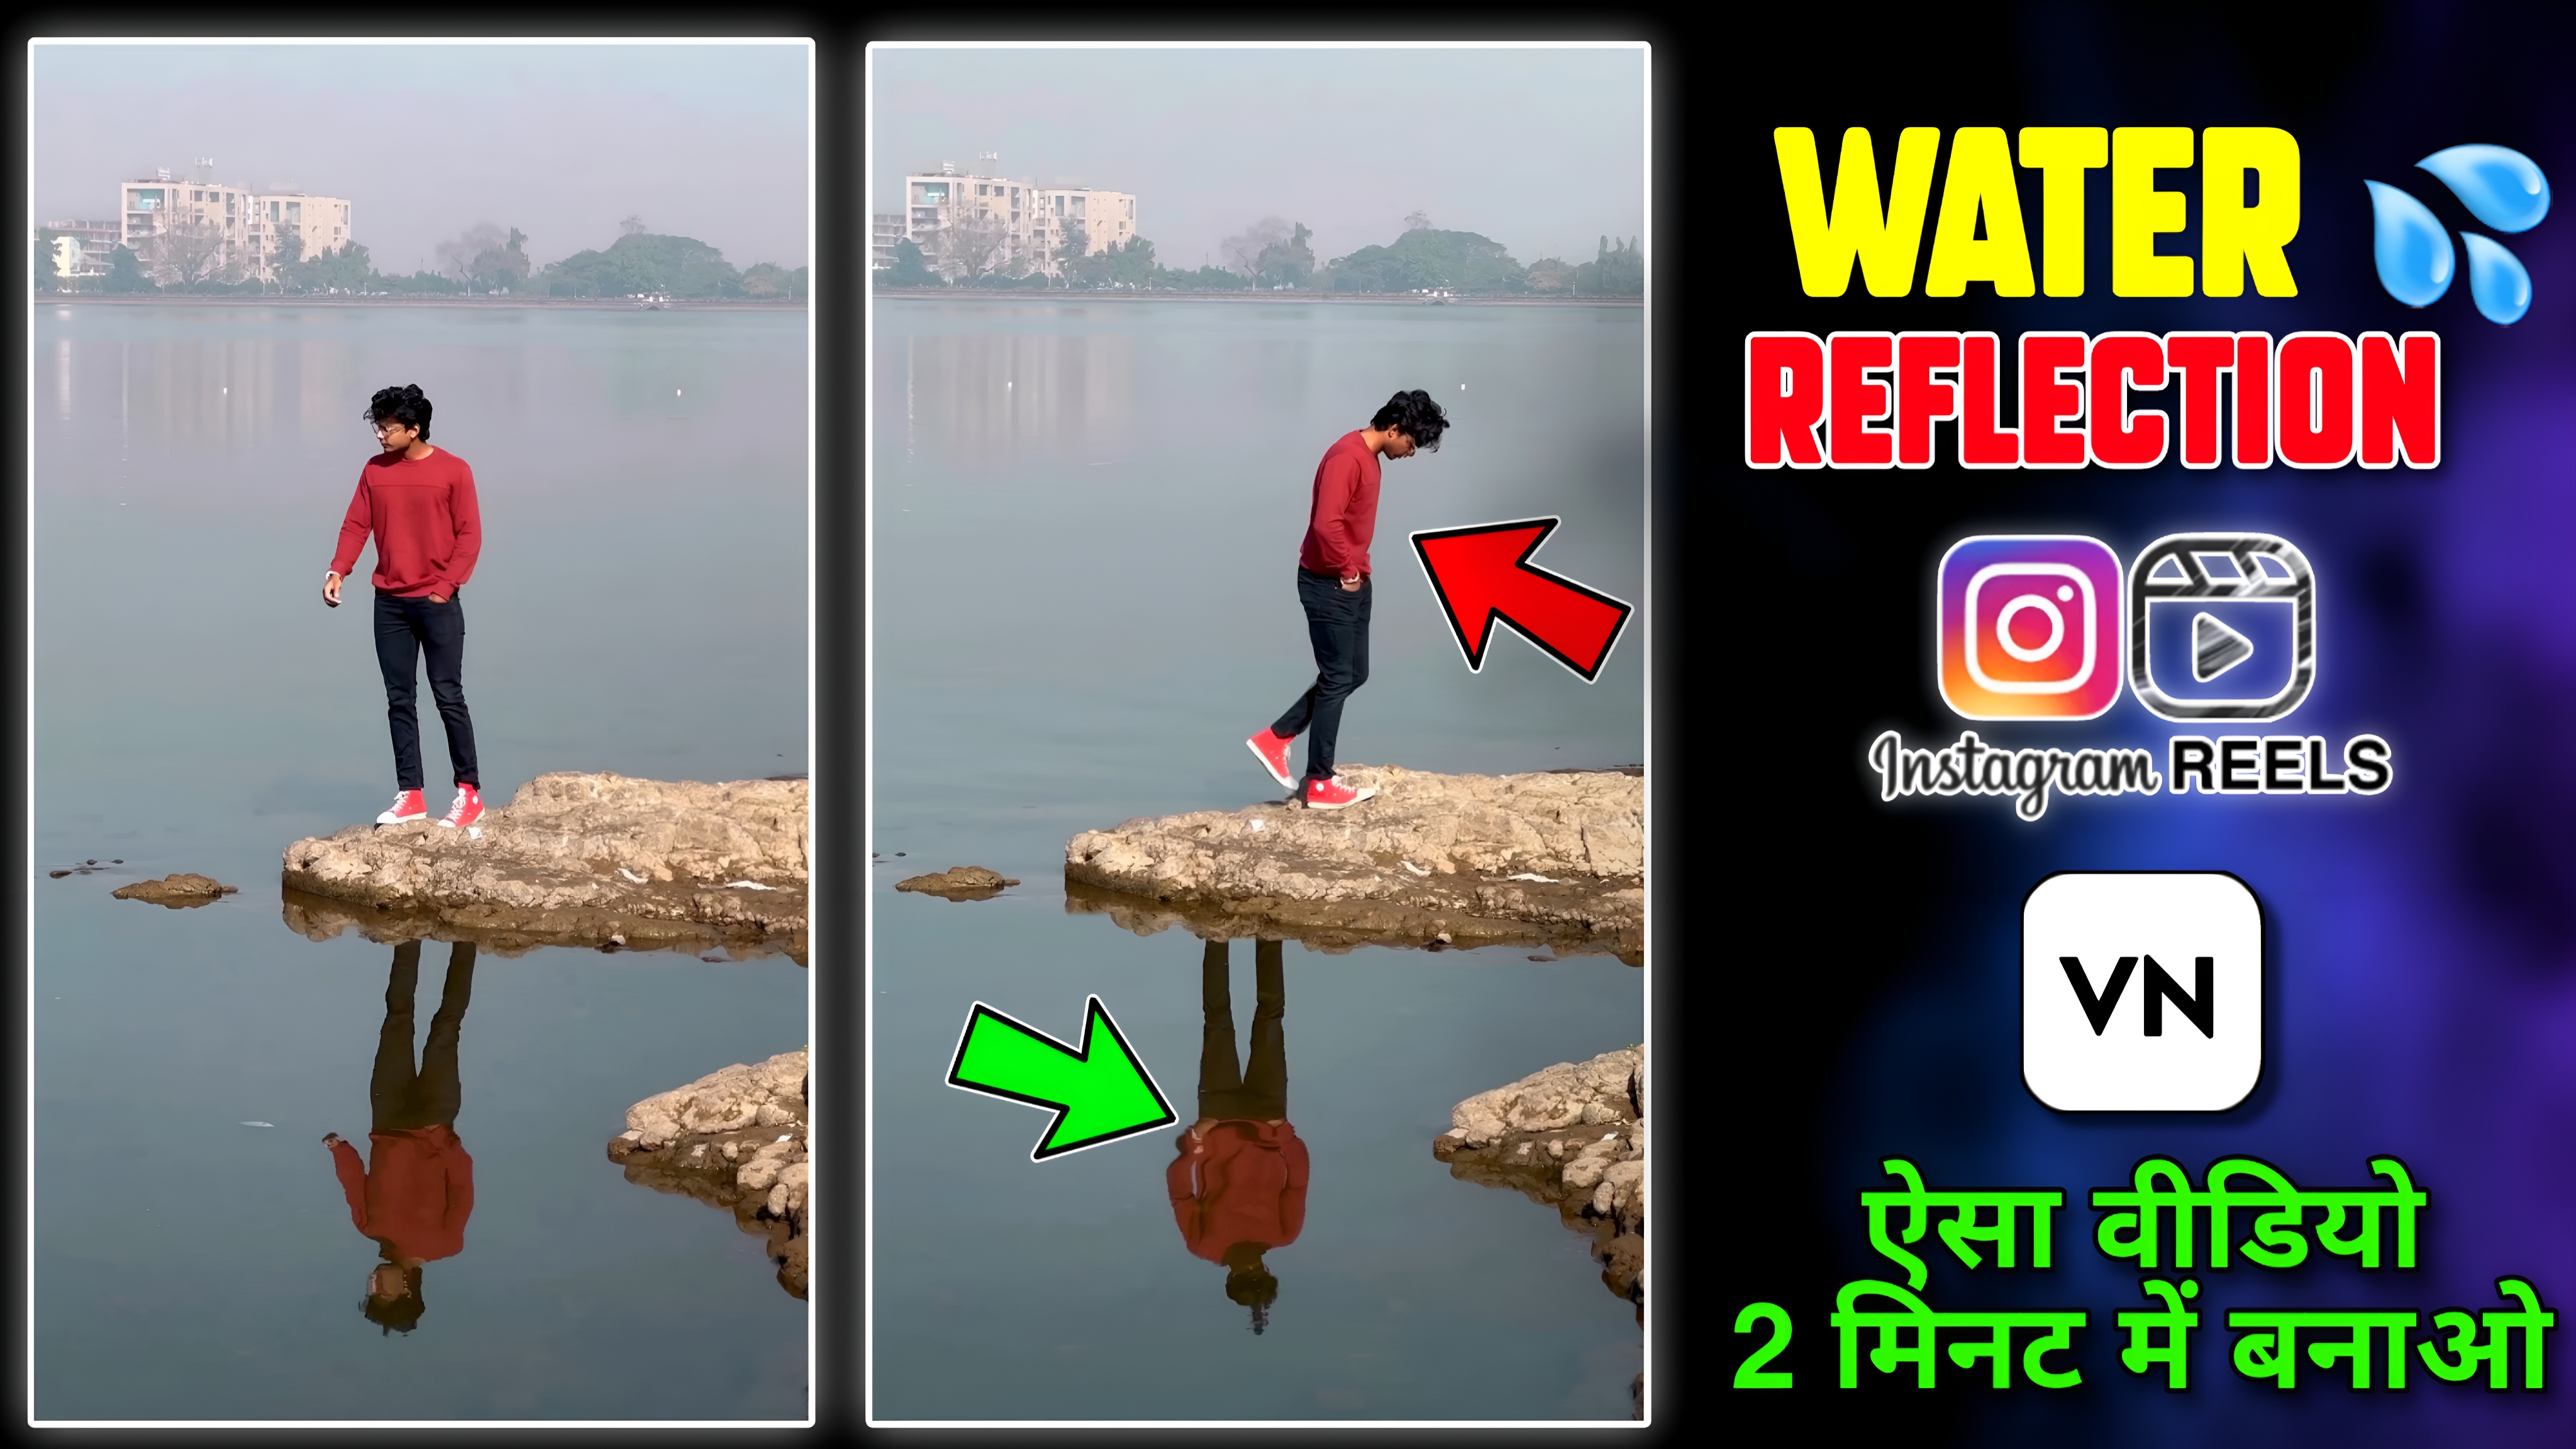 How To Make Water Reflect Video || Water Reflect Freeze Video Editing | VN Video Editing